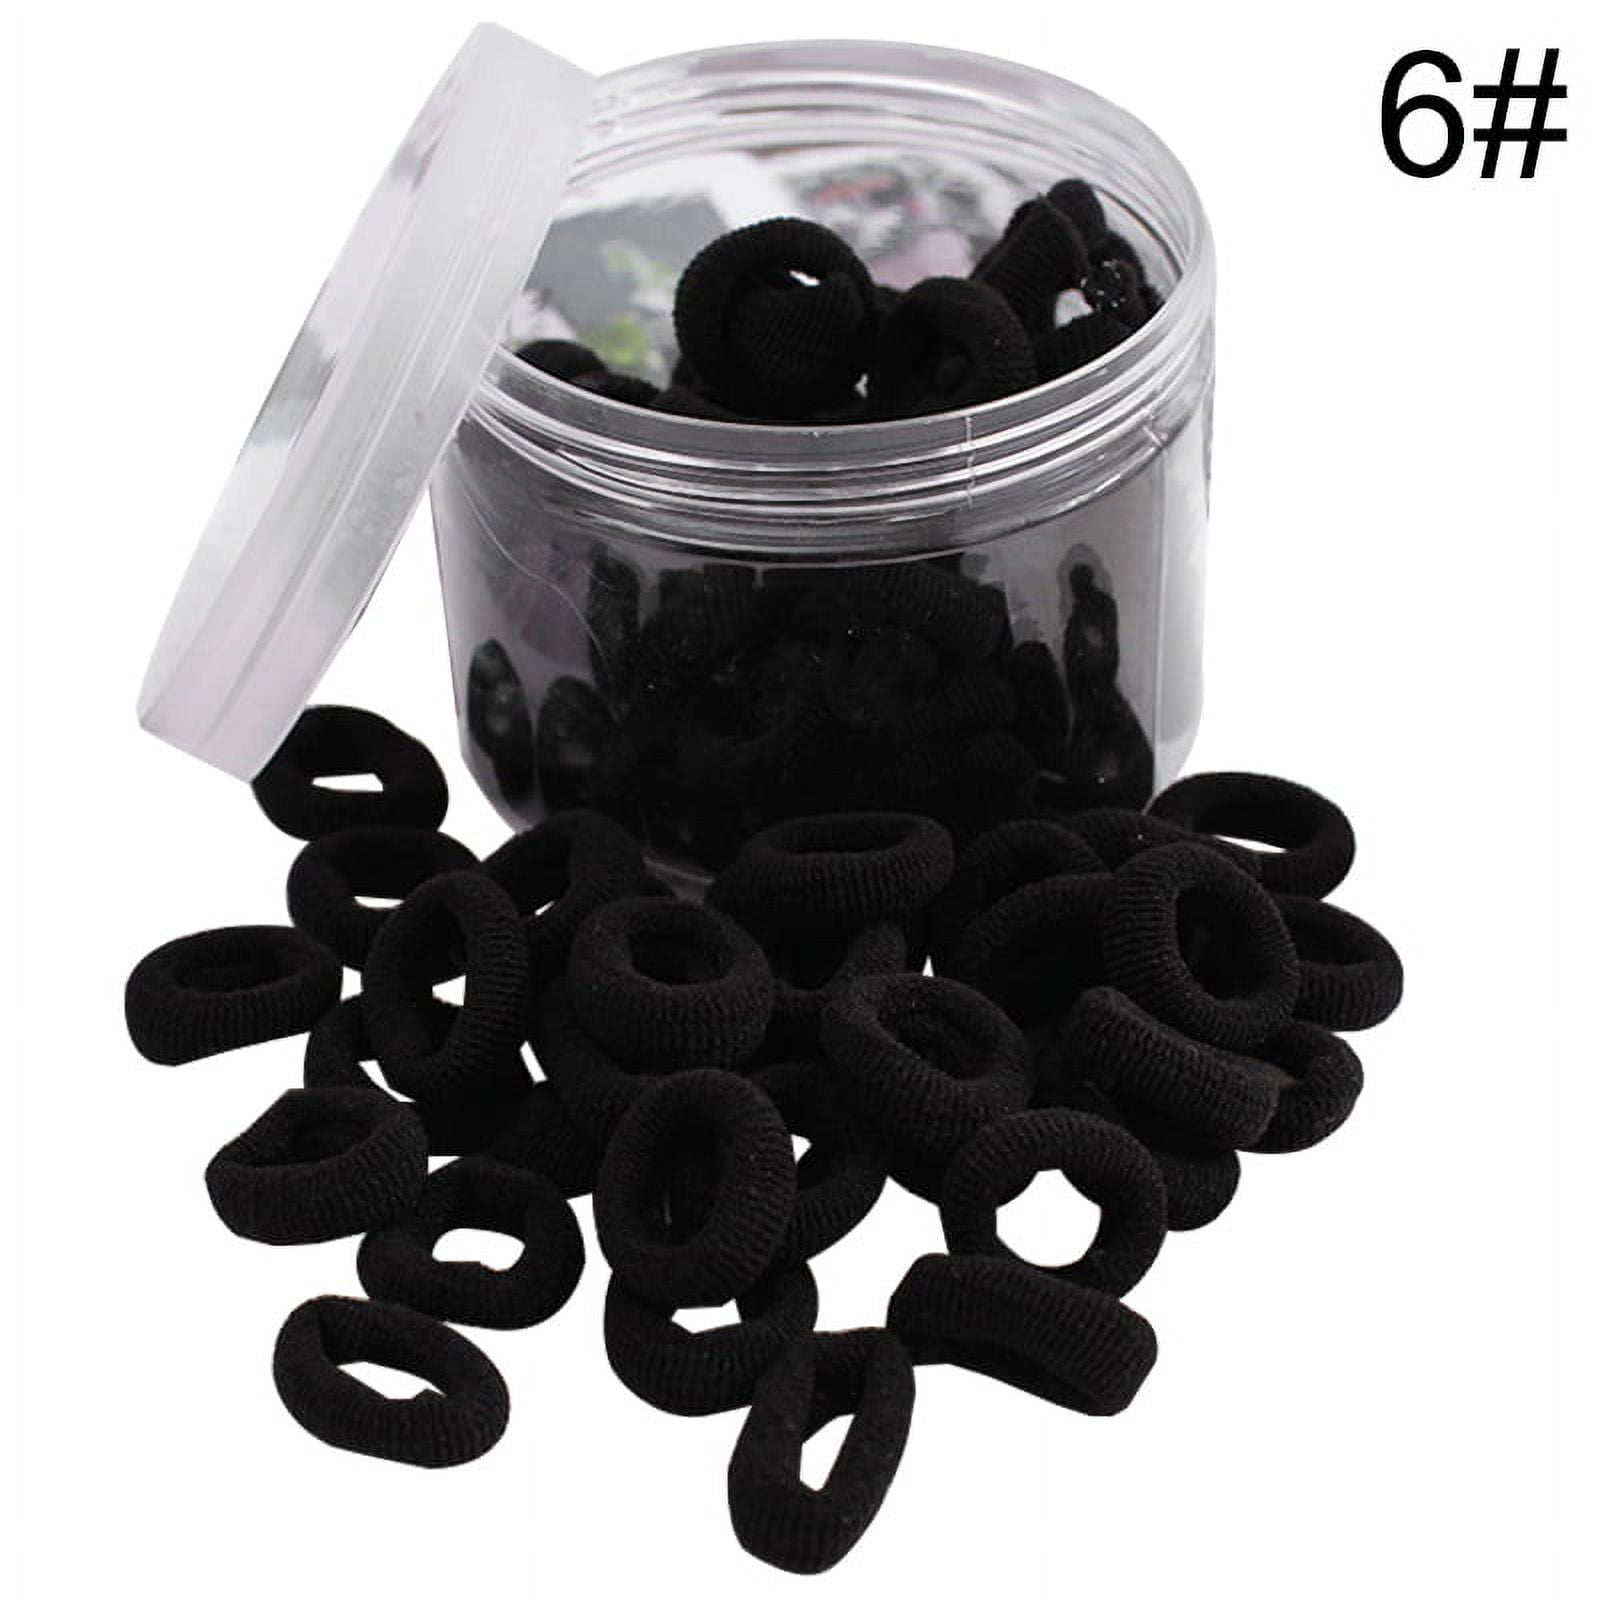 50/100pcs Elastic Hair Accessories For Girls Rubber Bands Candy  Fluorescence Black Colored Ring Ponytail Holder Hair Bands